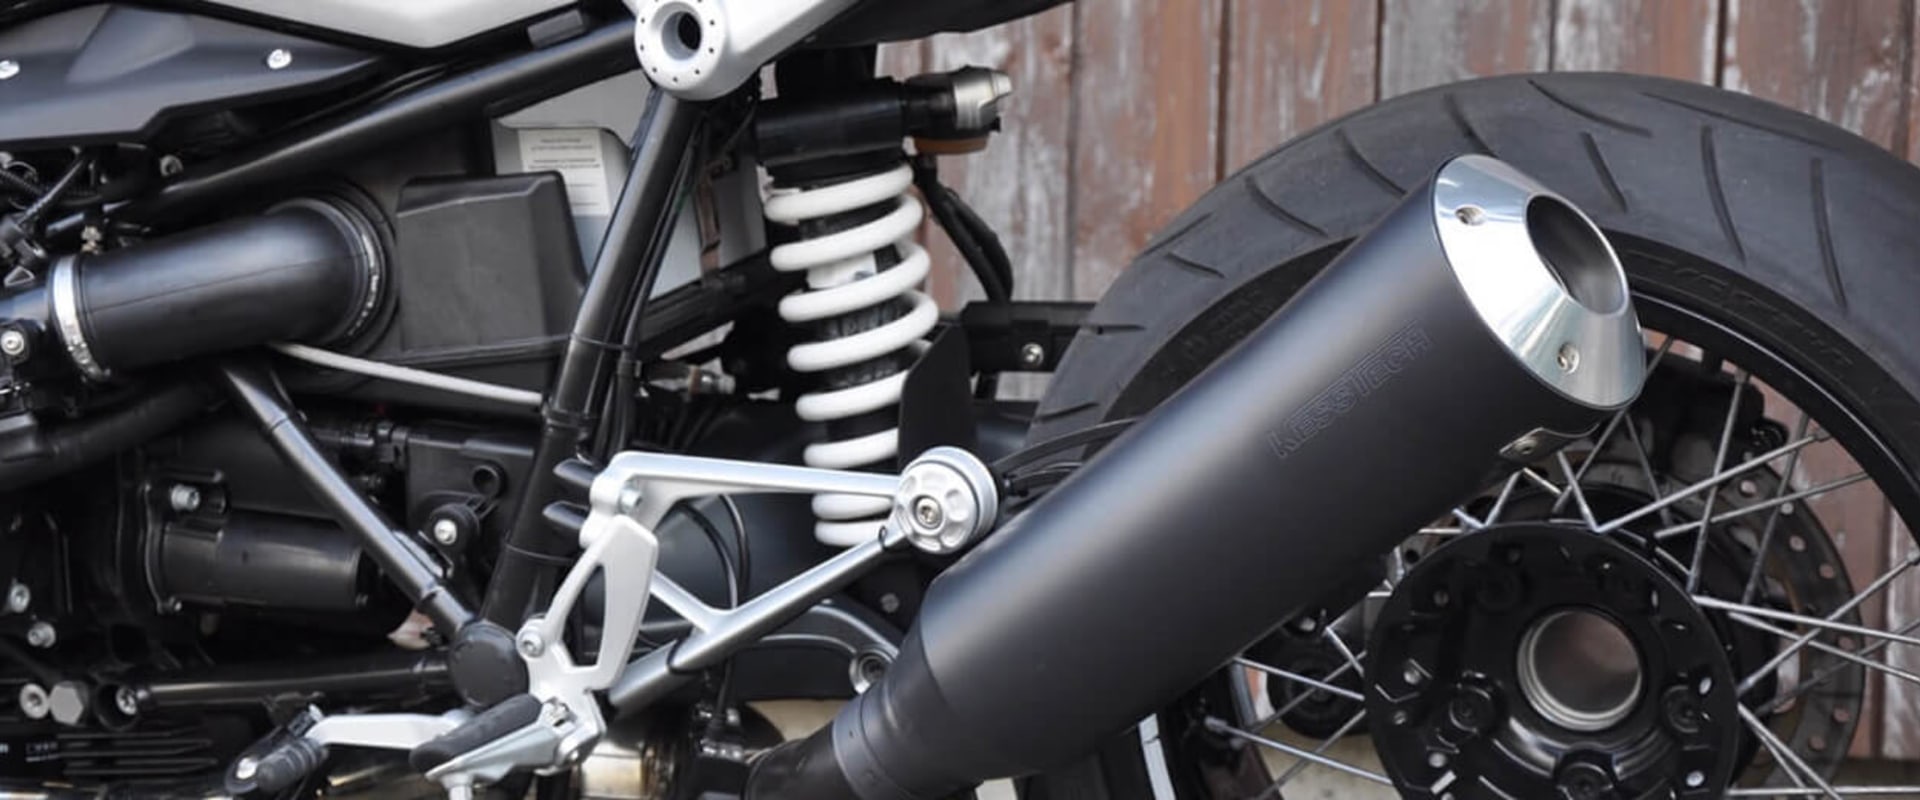 Do i need to remove the exhaust from my motorcycle before shipping it?